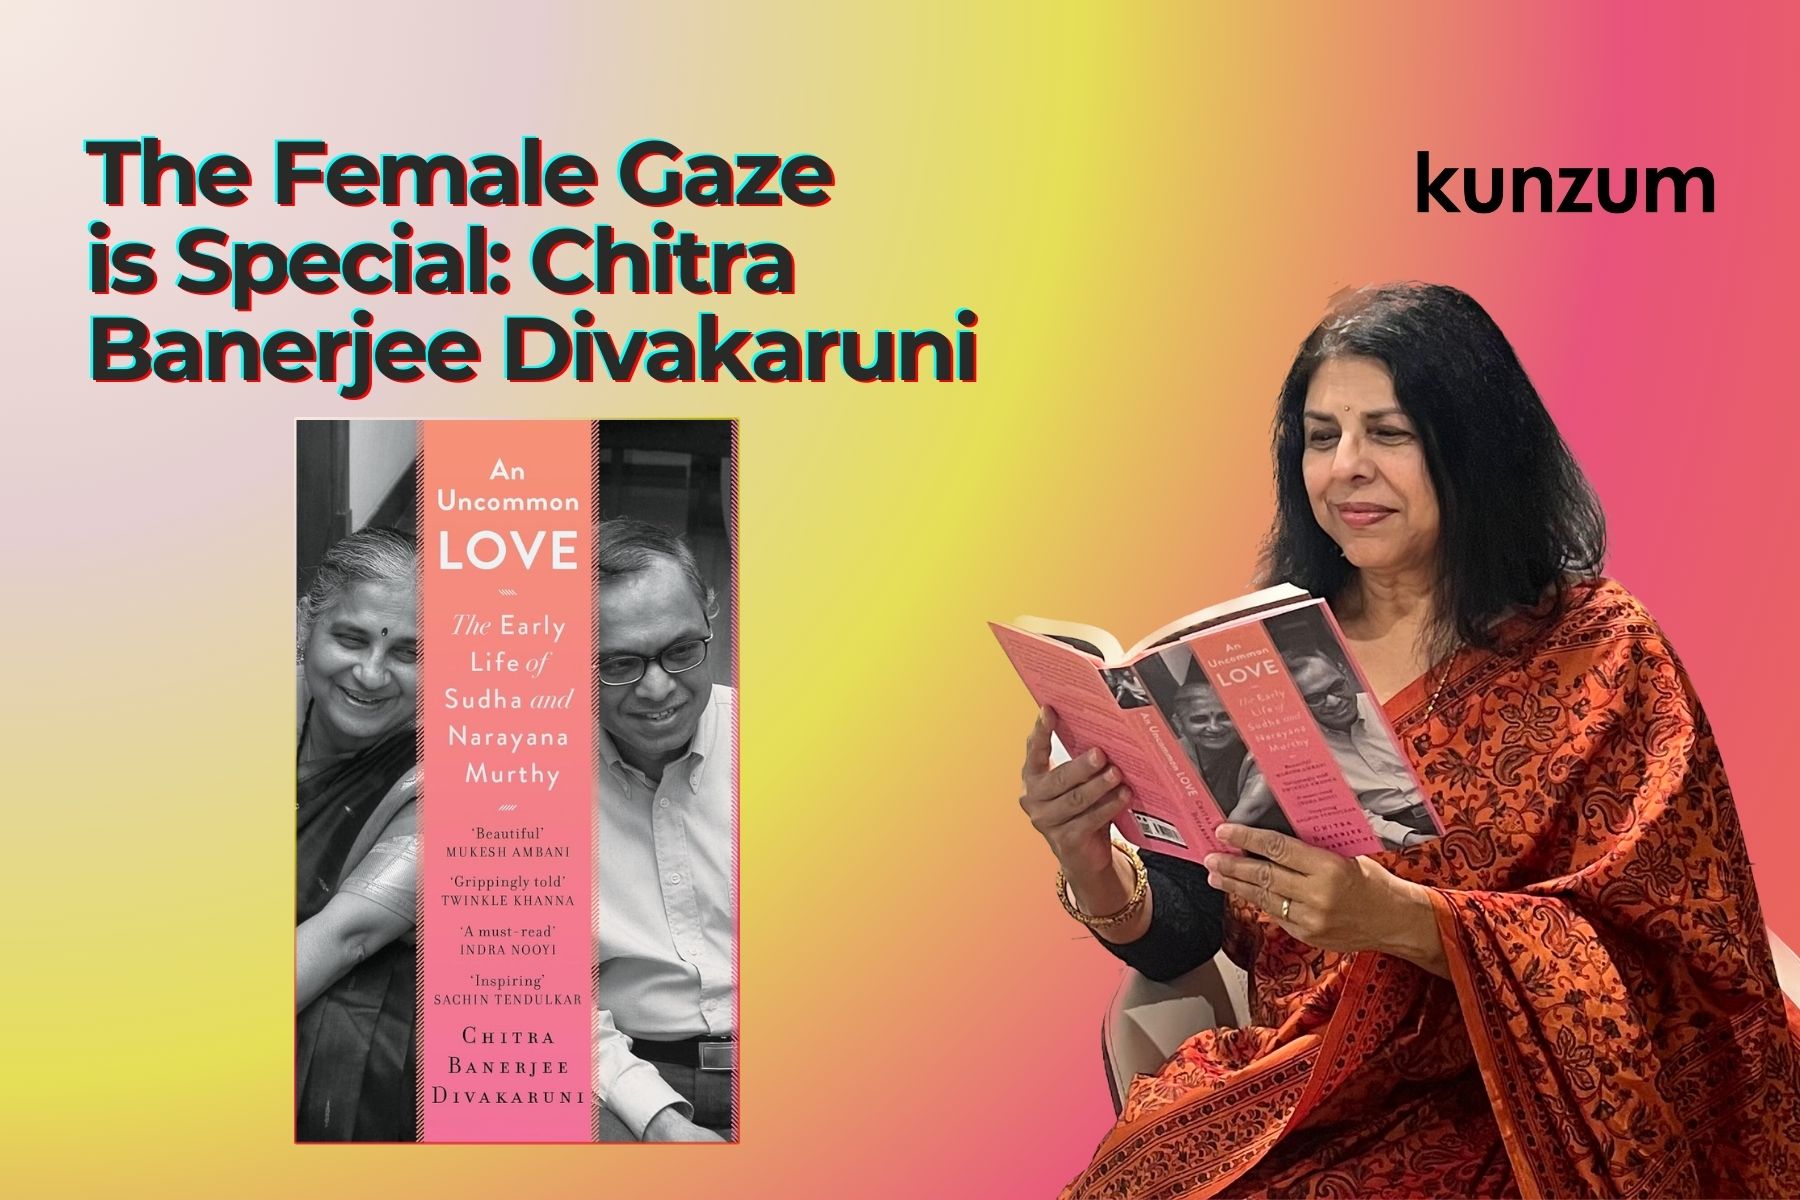 Author Interview: ‘There’s Something Special about Seeing a Woman Through a Woman’s Gaze,’ says Chitra Banerjee Divakaruni